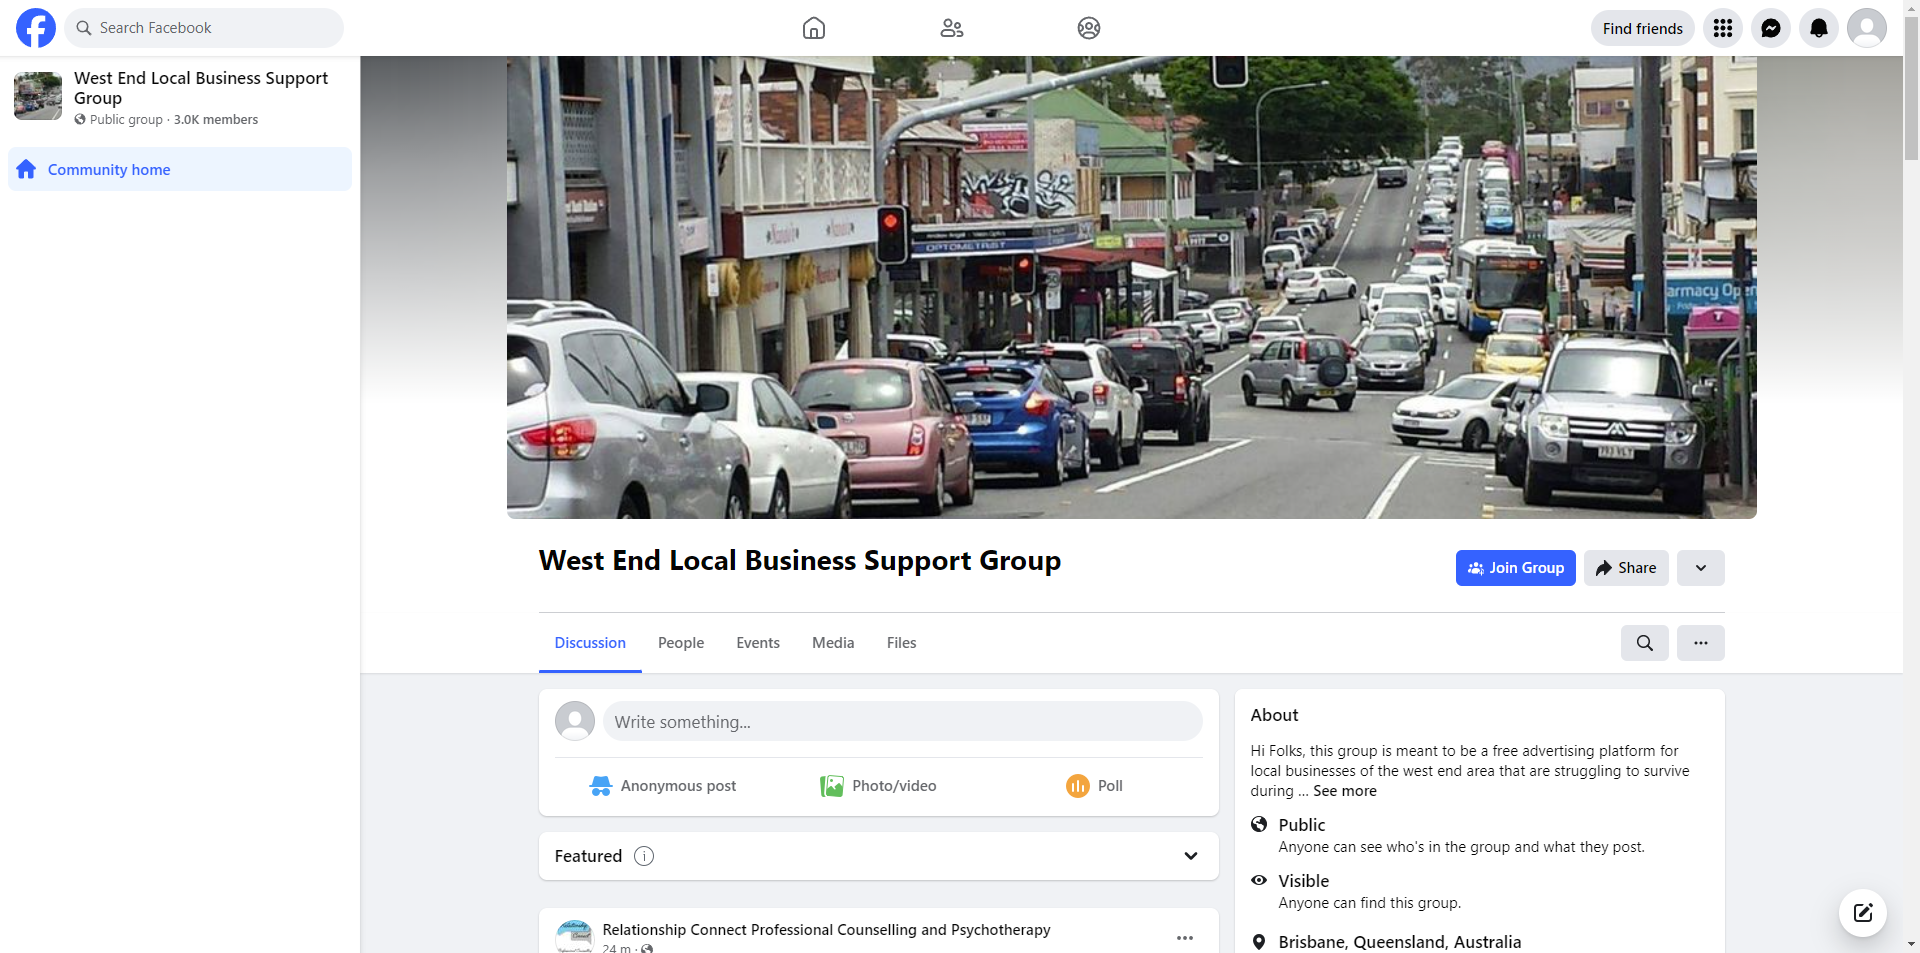 West End Local Business Support Group